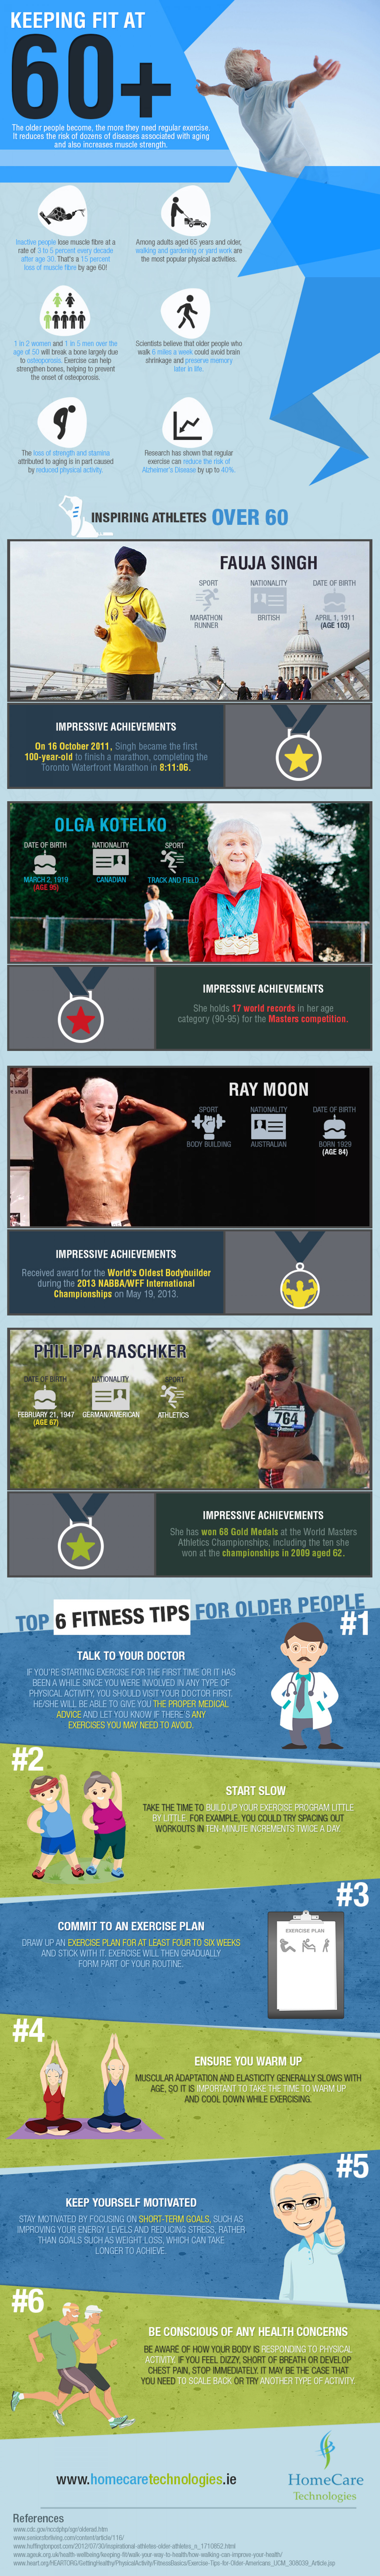 Keeping Fit at 60+ Infographic